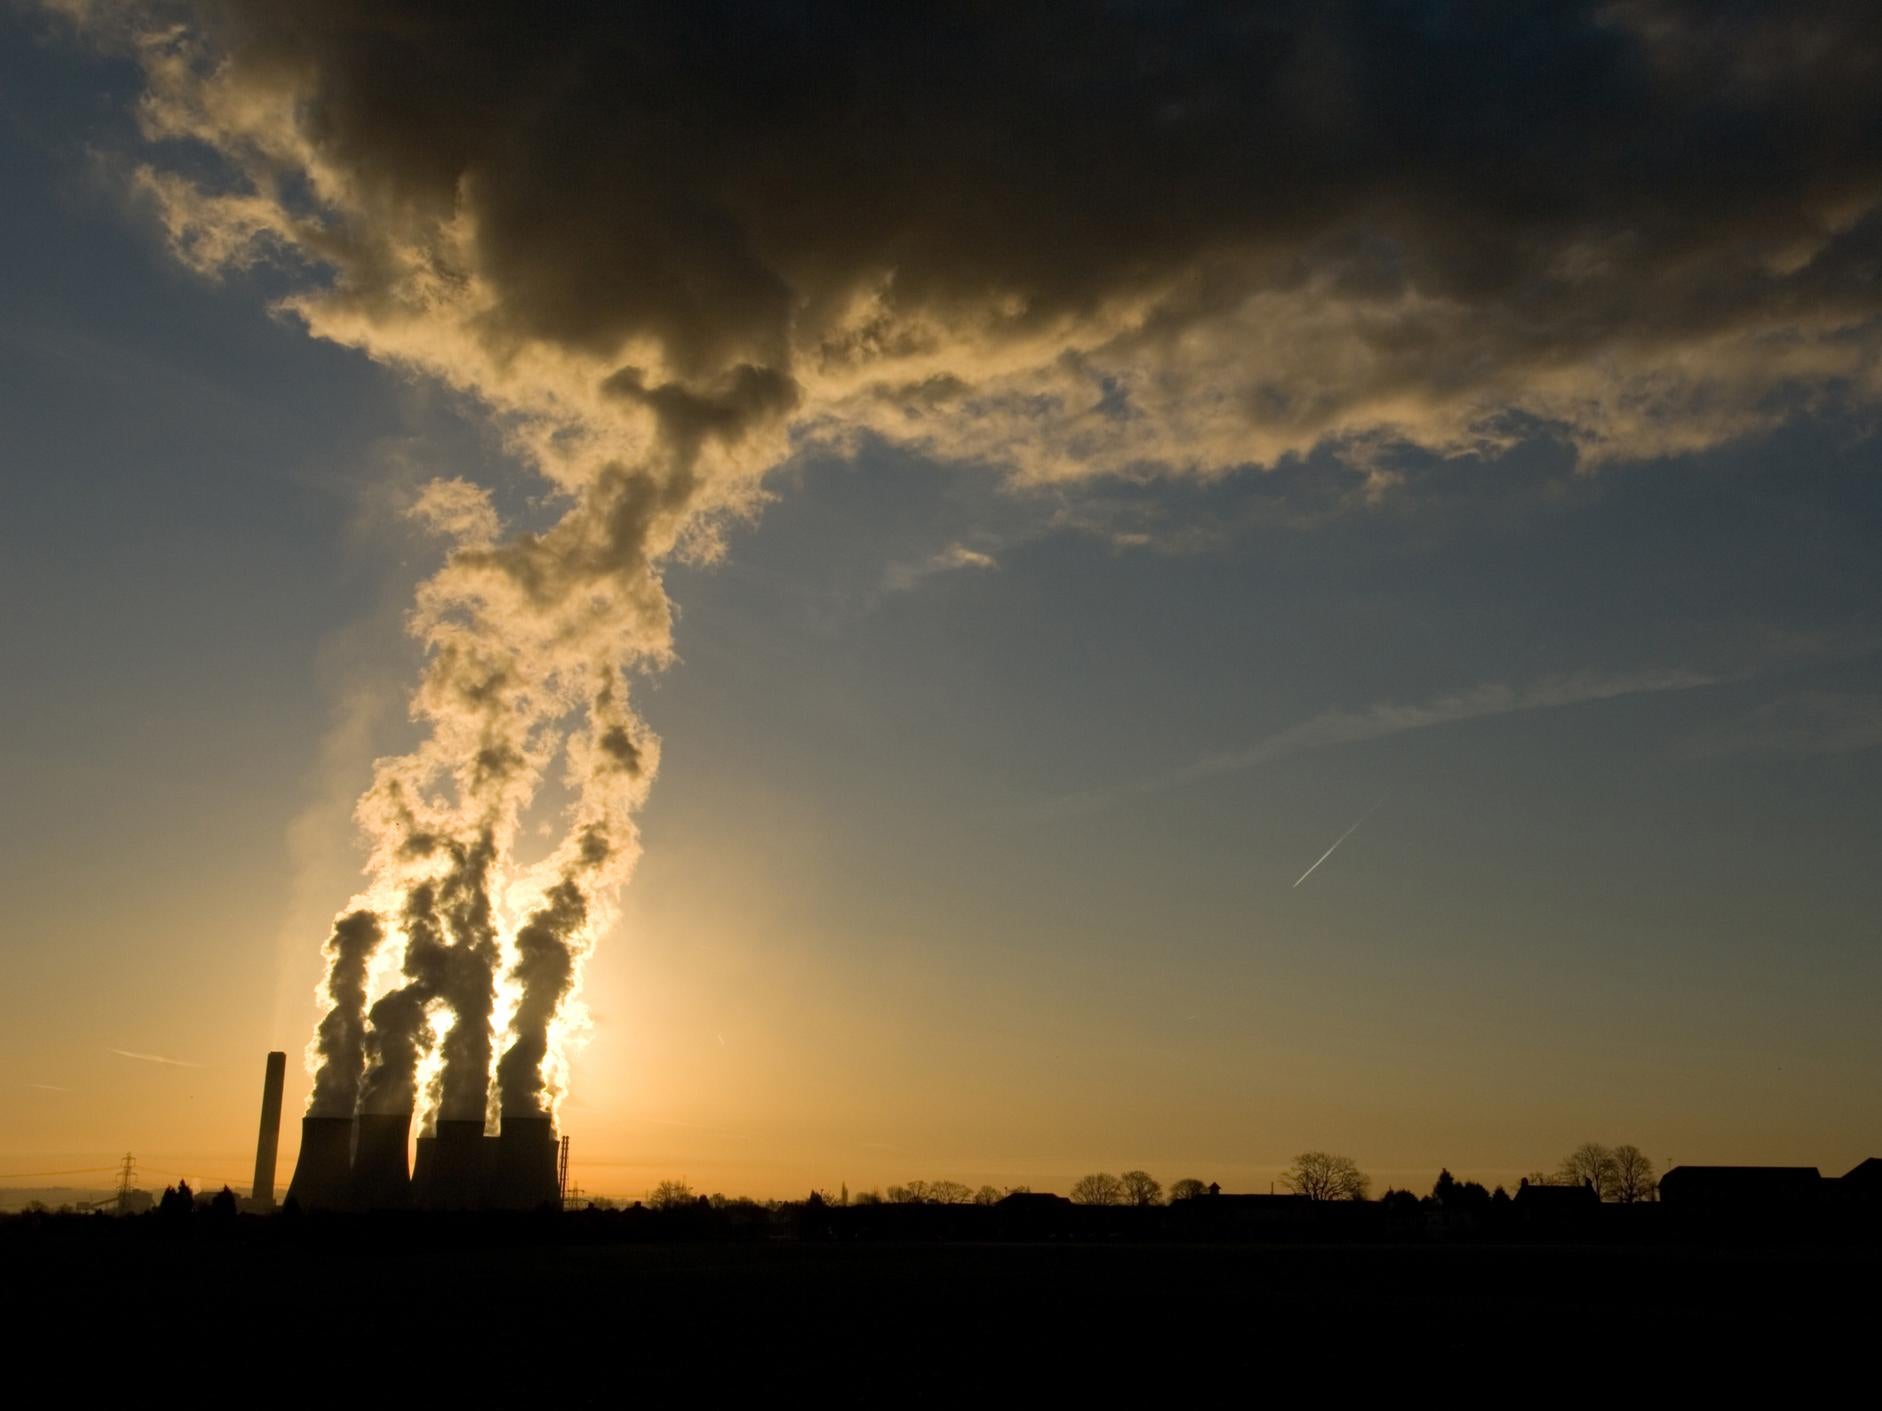 Fossil fuels, deforestation and cement production are all pumping out CO2 into the atmosphere